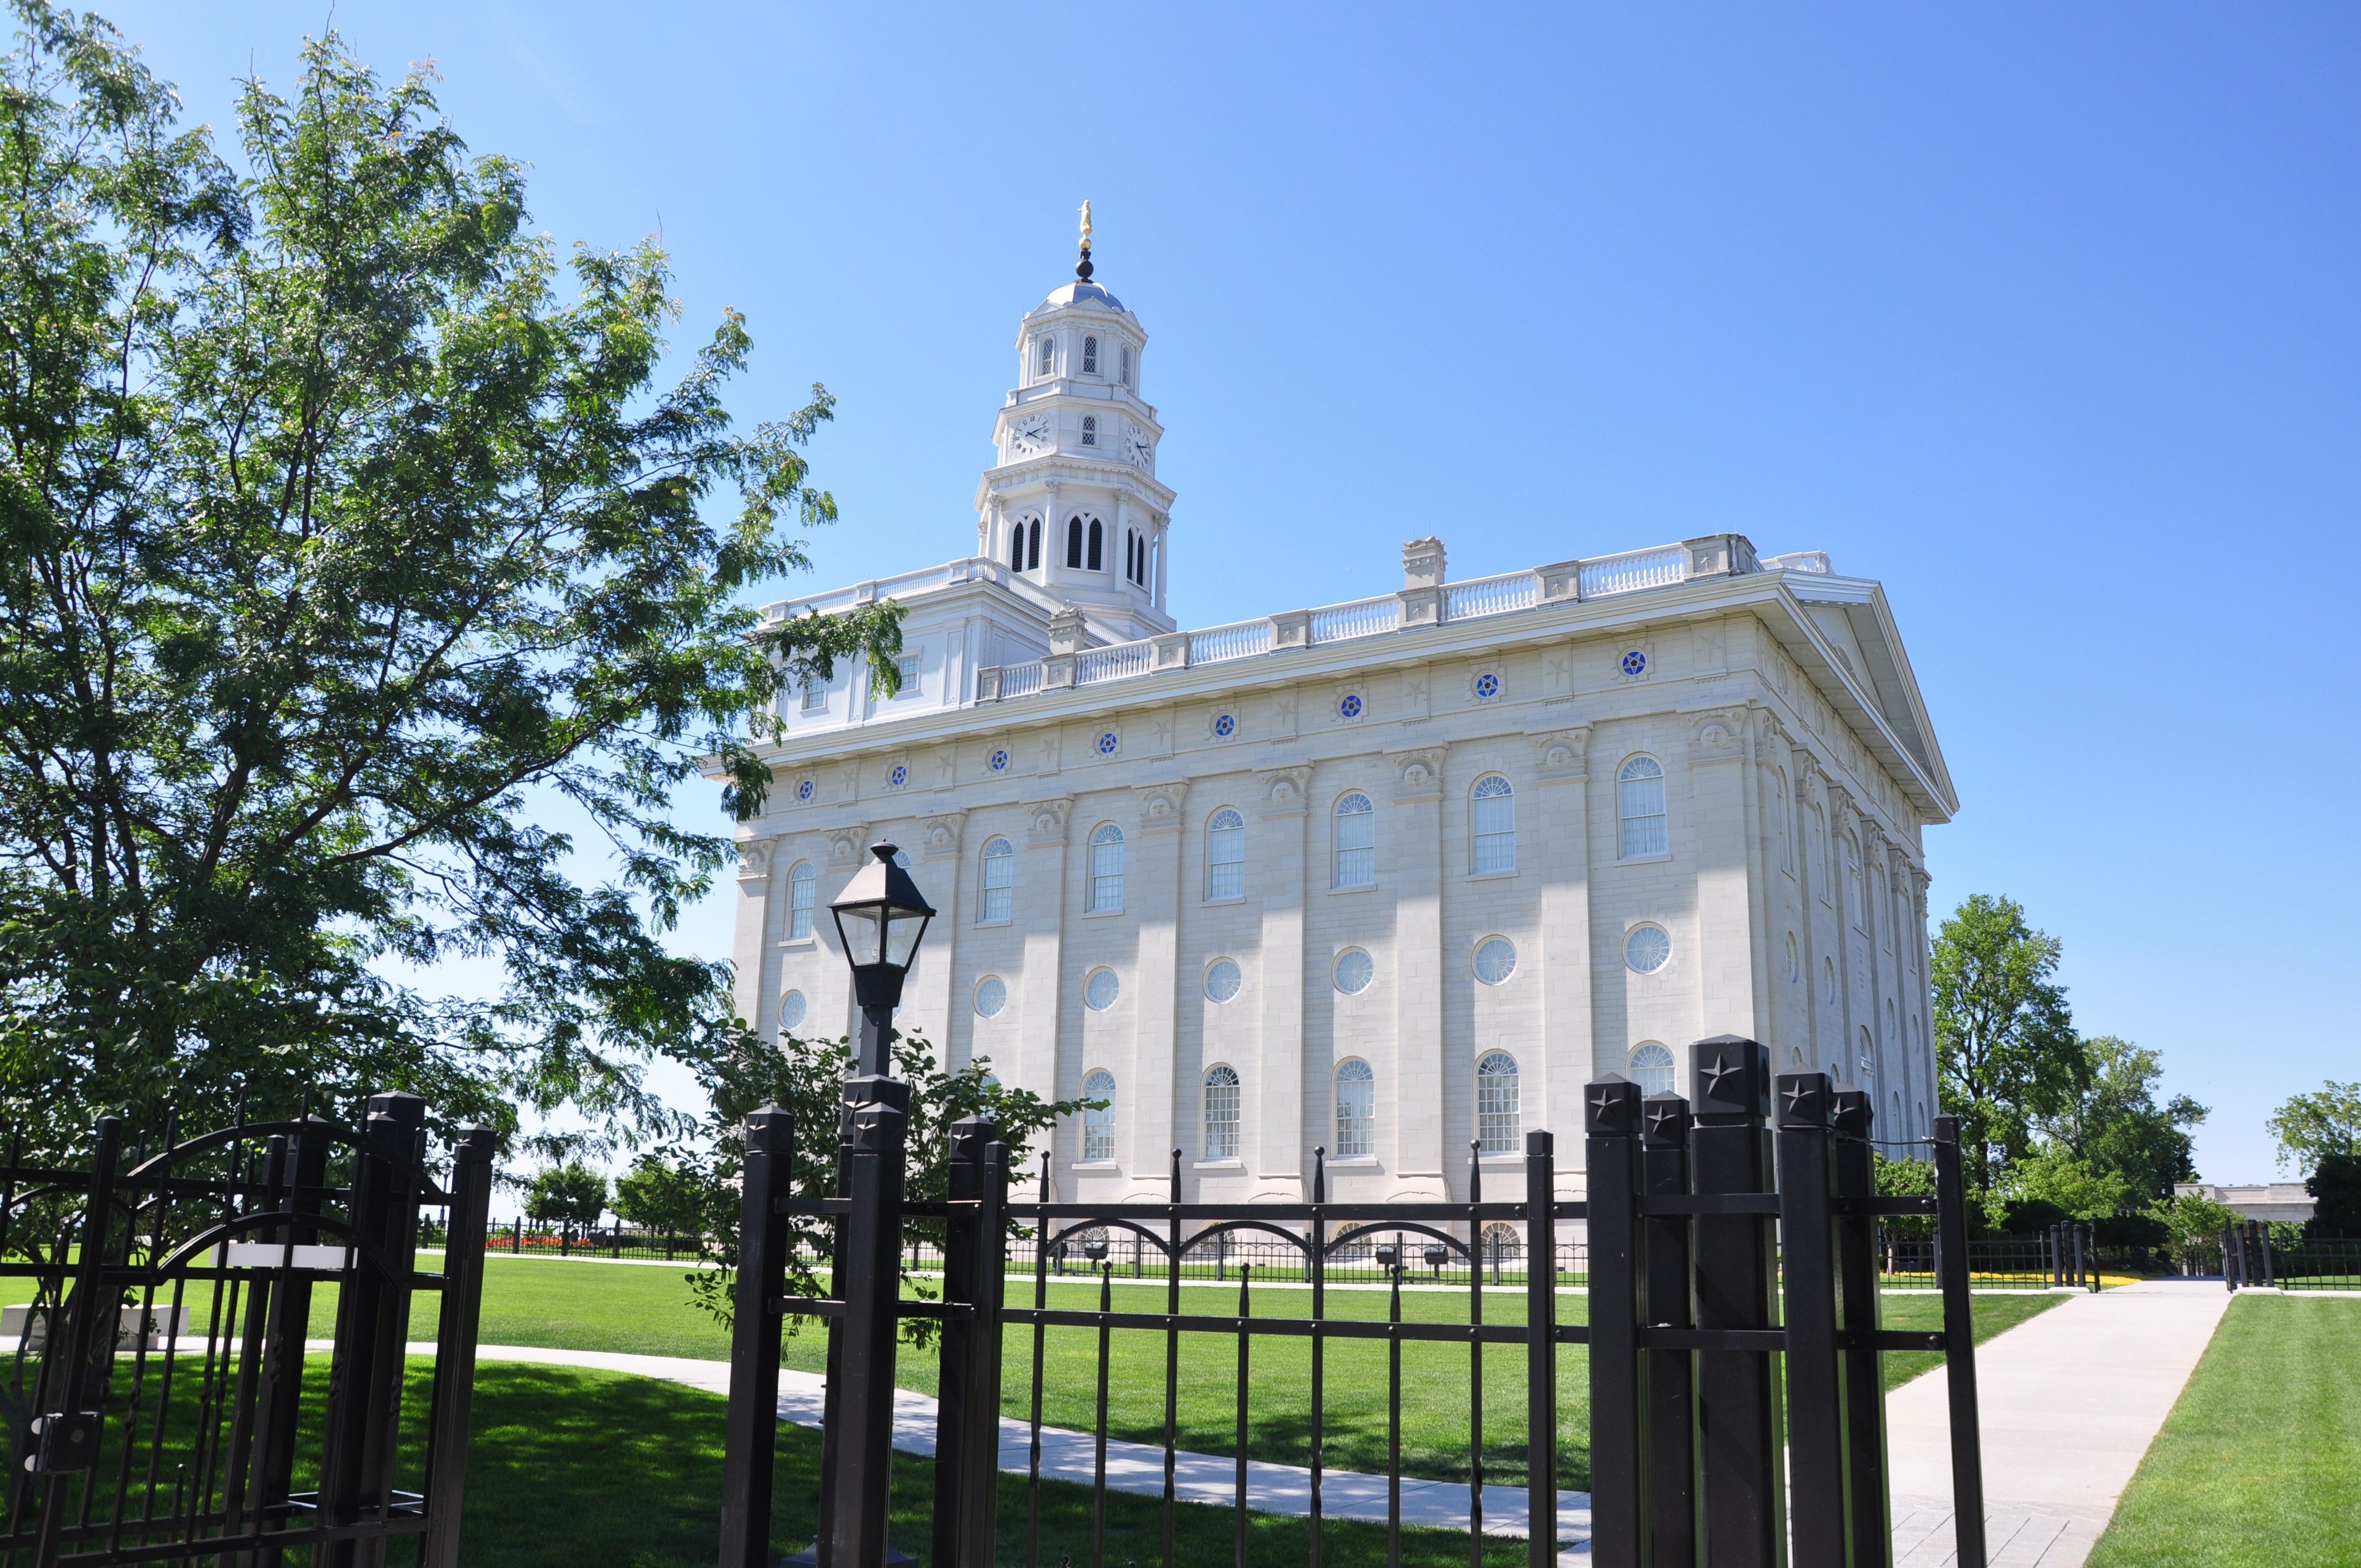 The Nauvoo Illinois Temple on a sunny day.